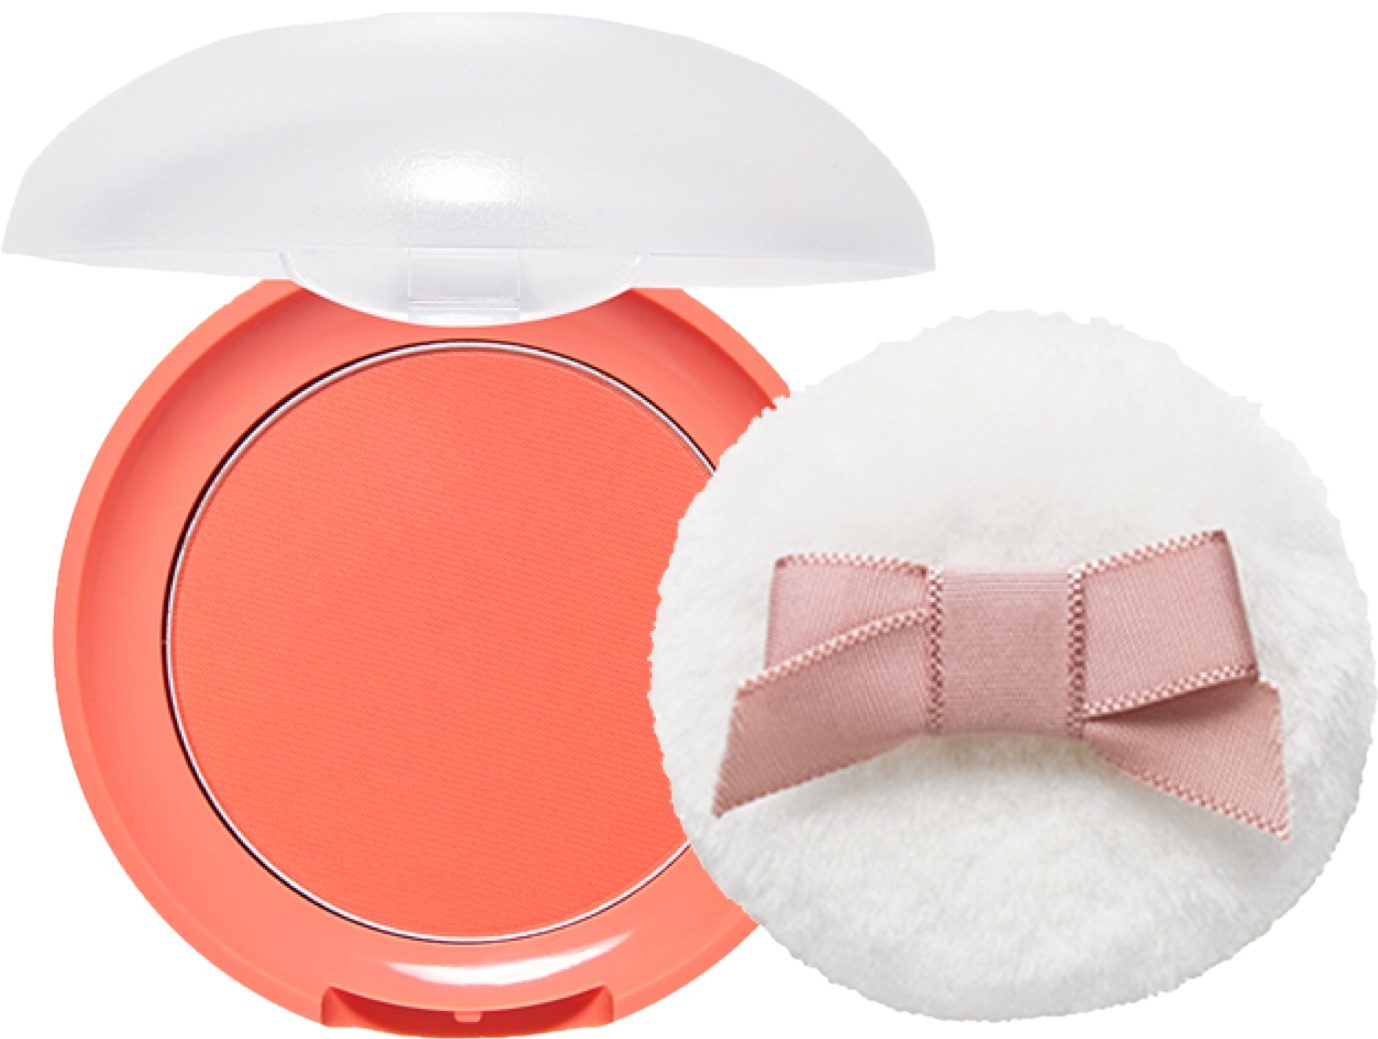 ETUDE HOUSE - LOVELY COOKIE BLUSHER